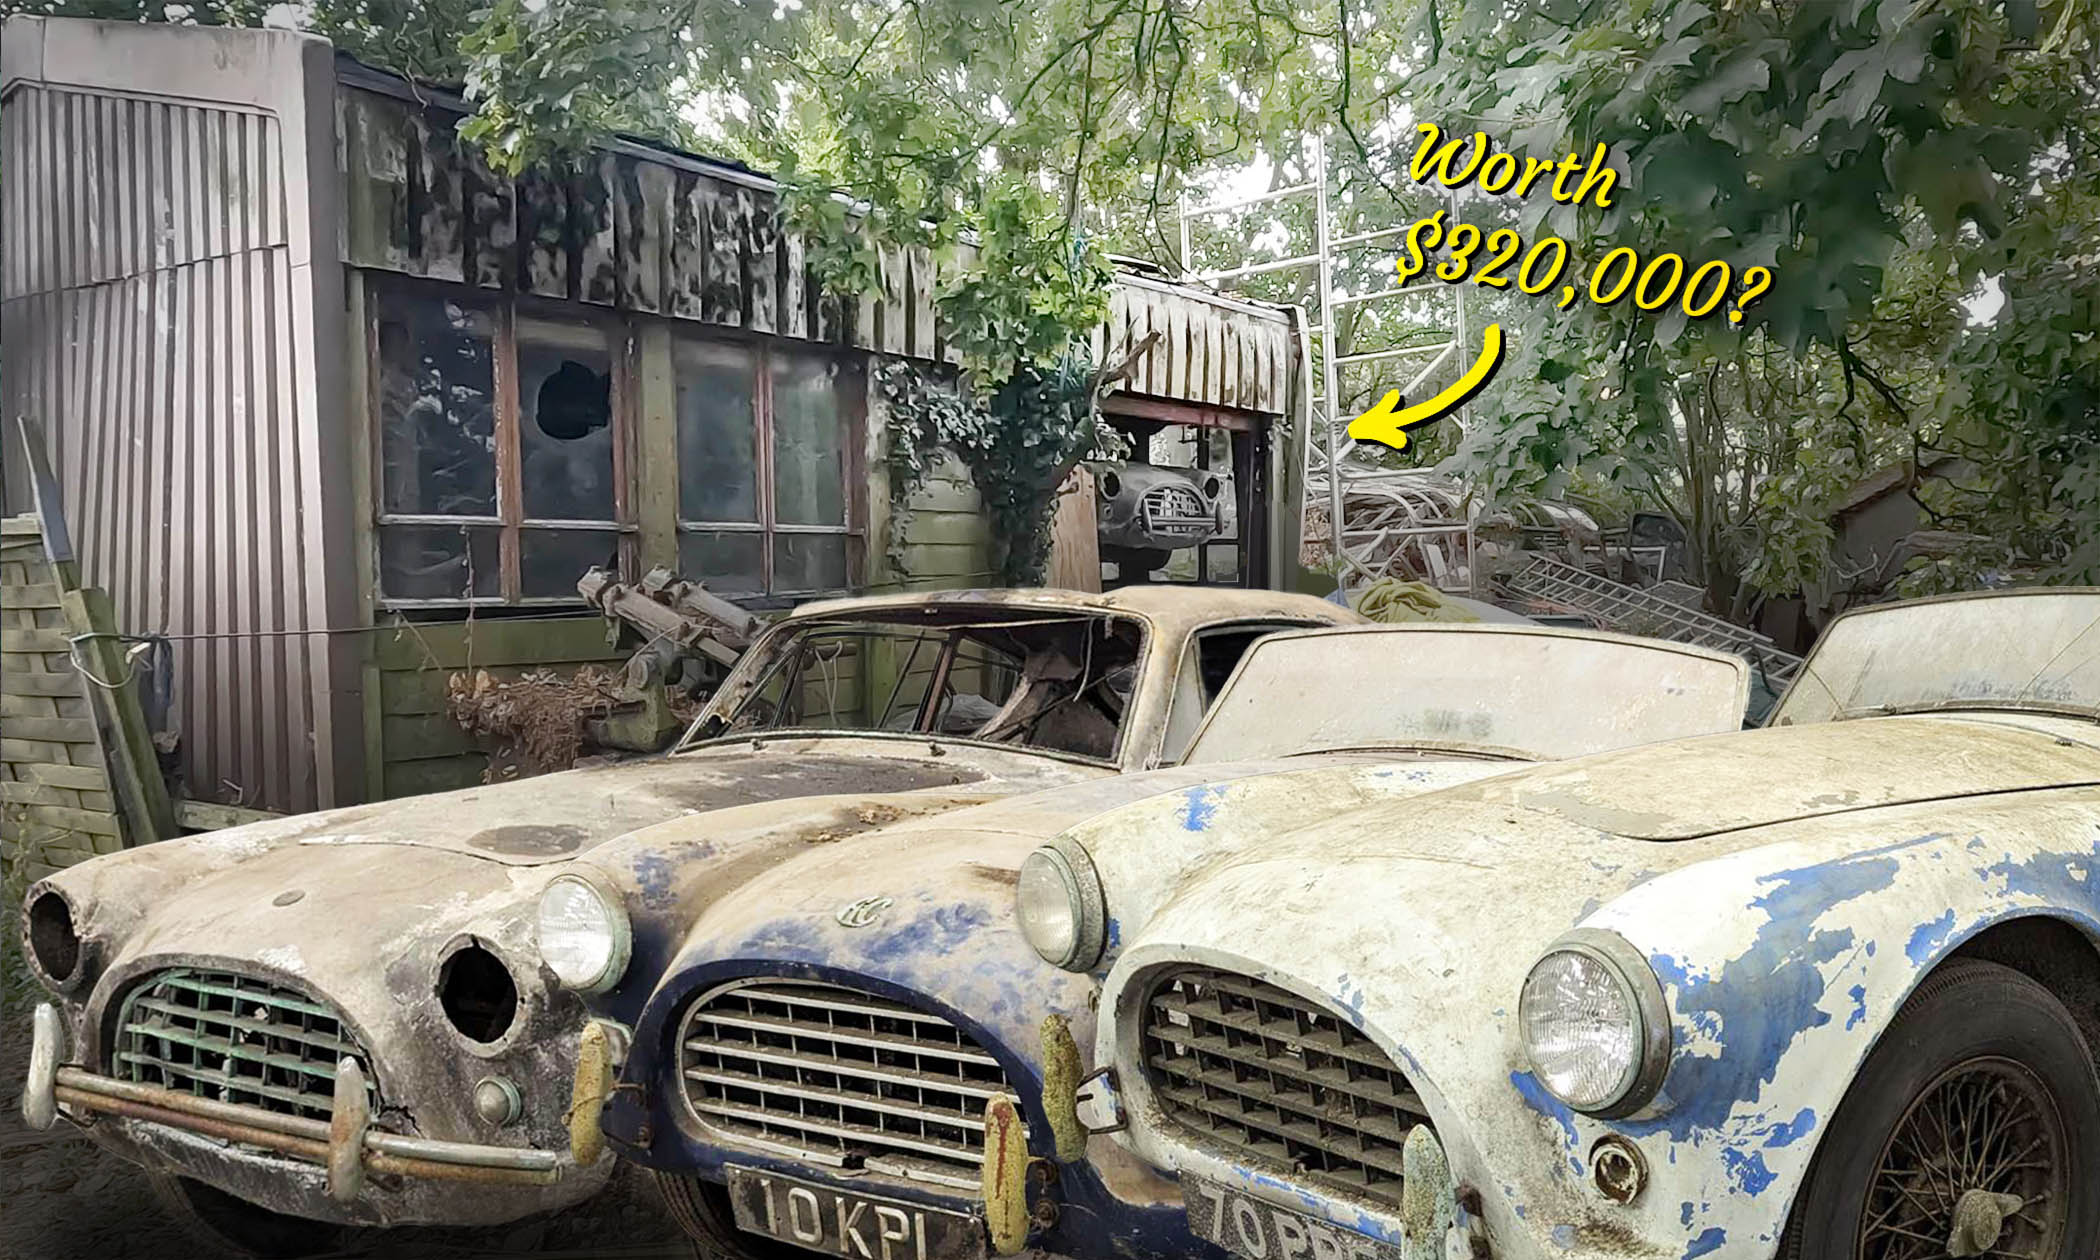 The Most Unbelievable Classic Car Barn Find I Have Ever Found